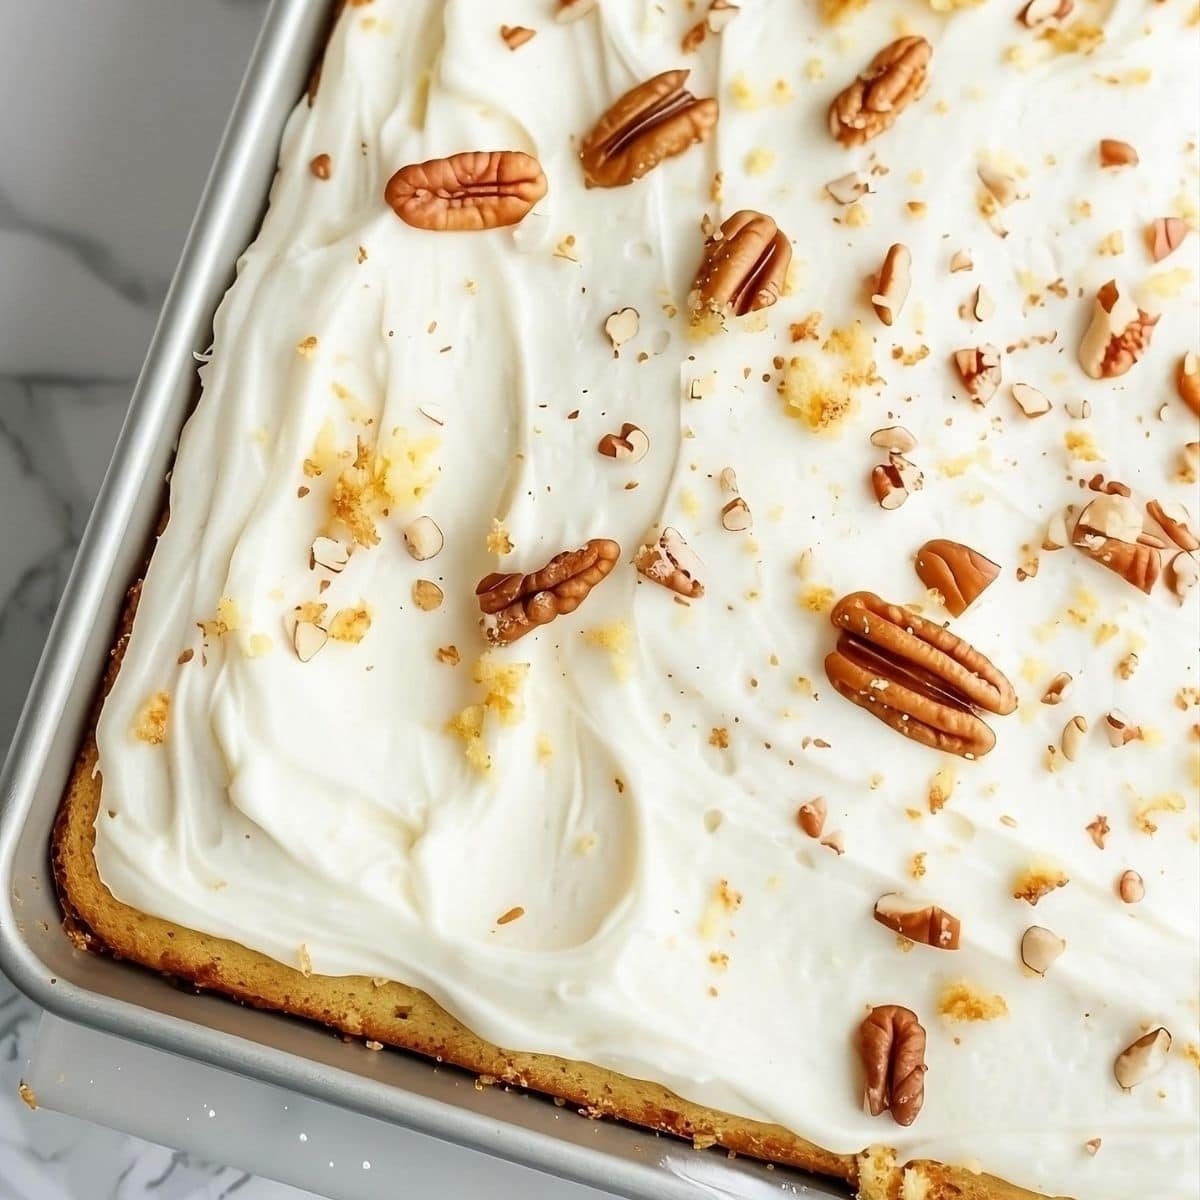 Top down view of a pineapple sheet cake with cream cheese frosting and chopped pecans